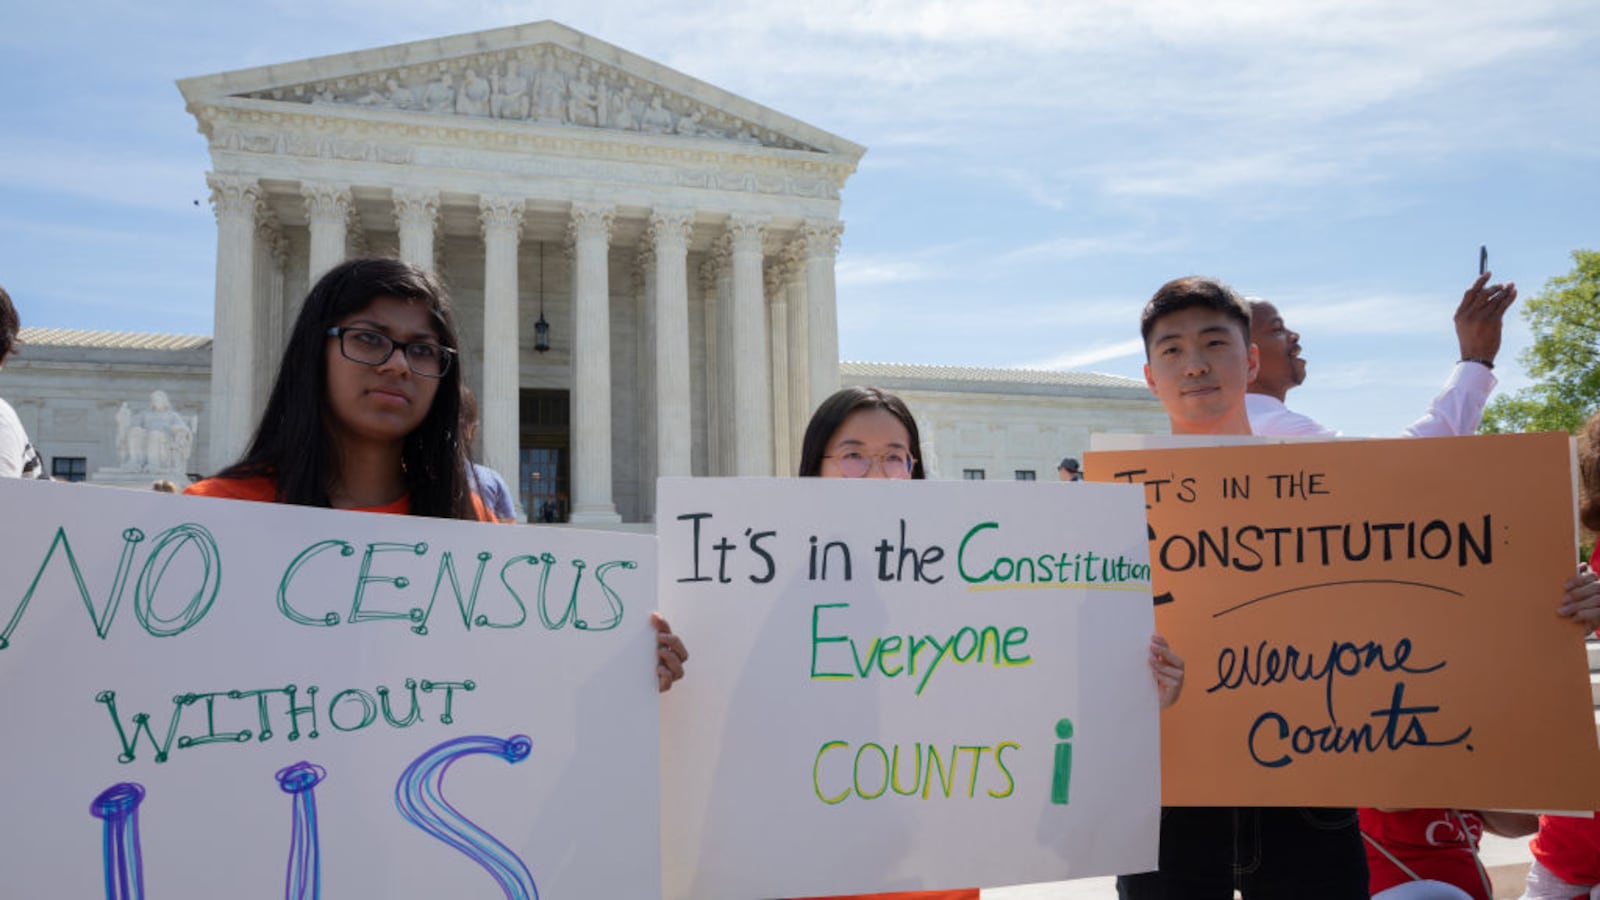 As the Supreme Court justices heard oral arguments over the 2020 census citizenship question, protesters outside called for the controversial question's exclusion. The question is projected to cost school districts federal funding for low-income students.